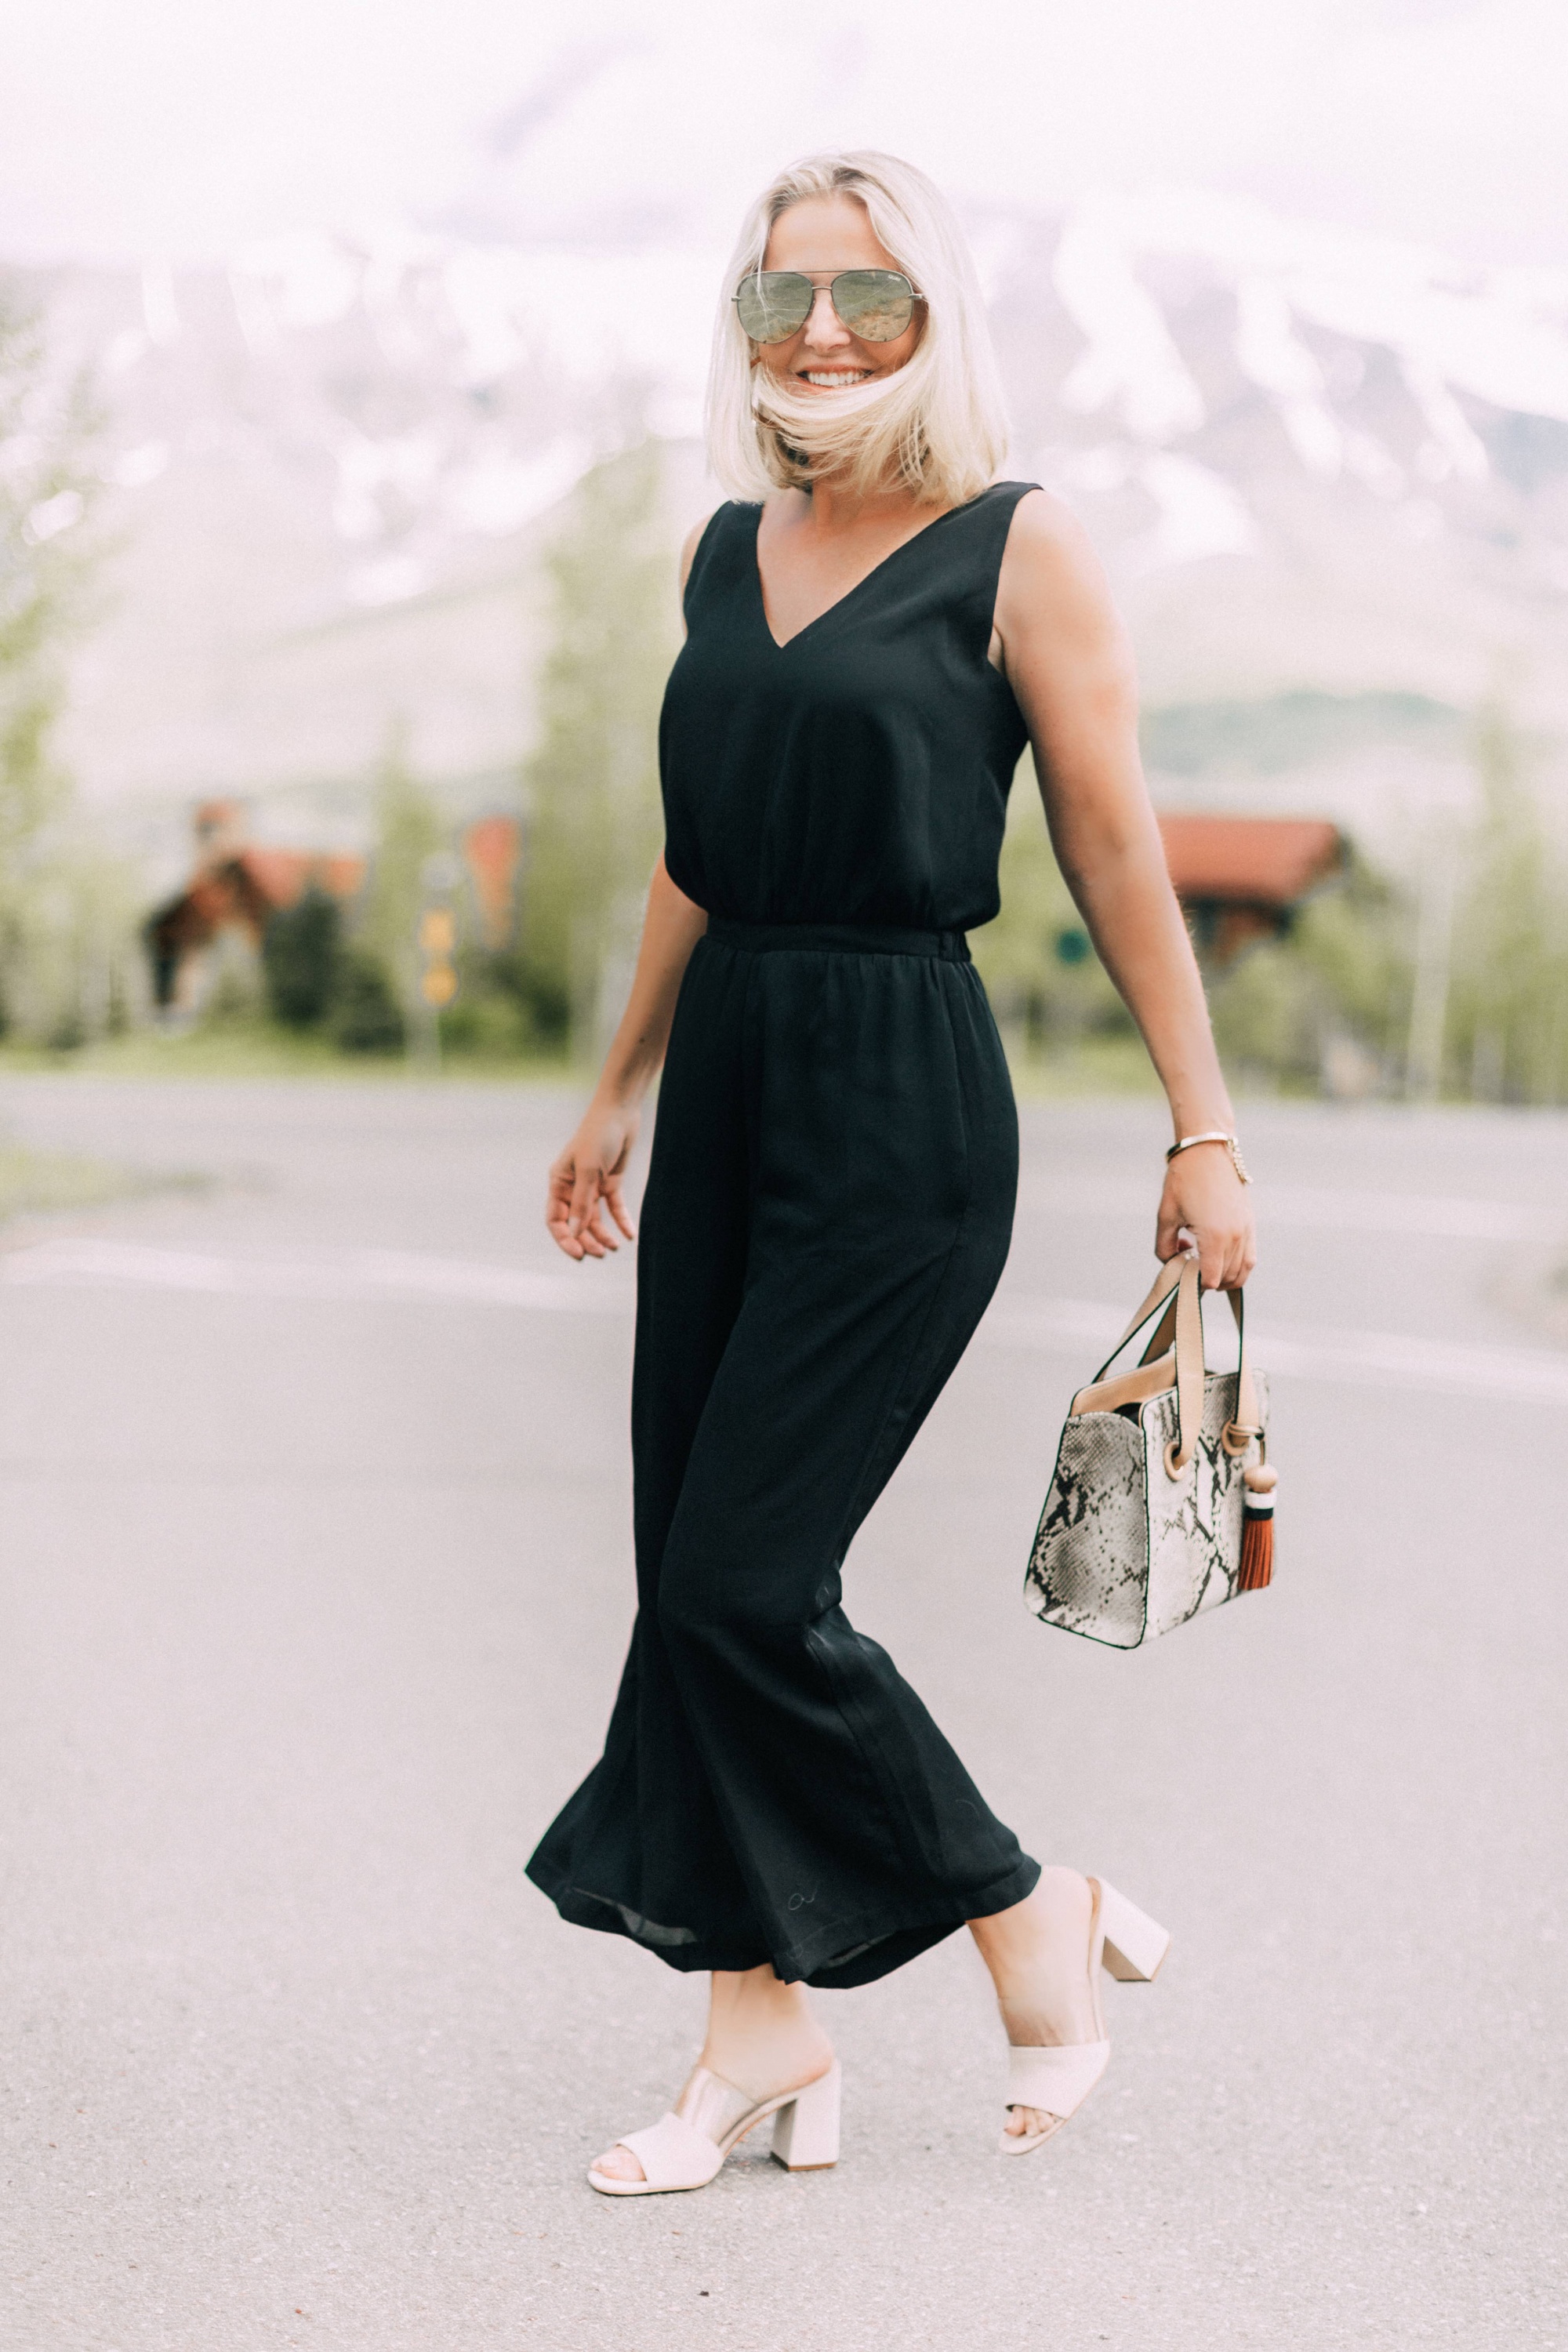 Lucite Trend, Fashion blogger Erin Busbee of BusbeeStyle.com wearing lucite mules from Vince Camuto with J Brand jeans, white Leith top, Hermes belt, and a python print Vince Camuto bag in Telluride, Colorado